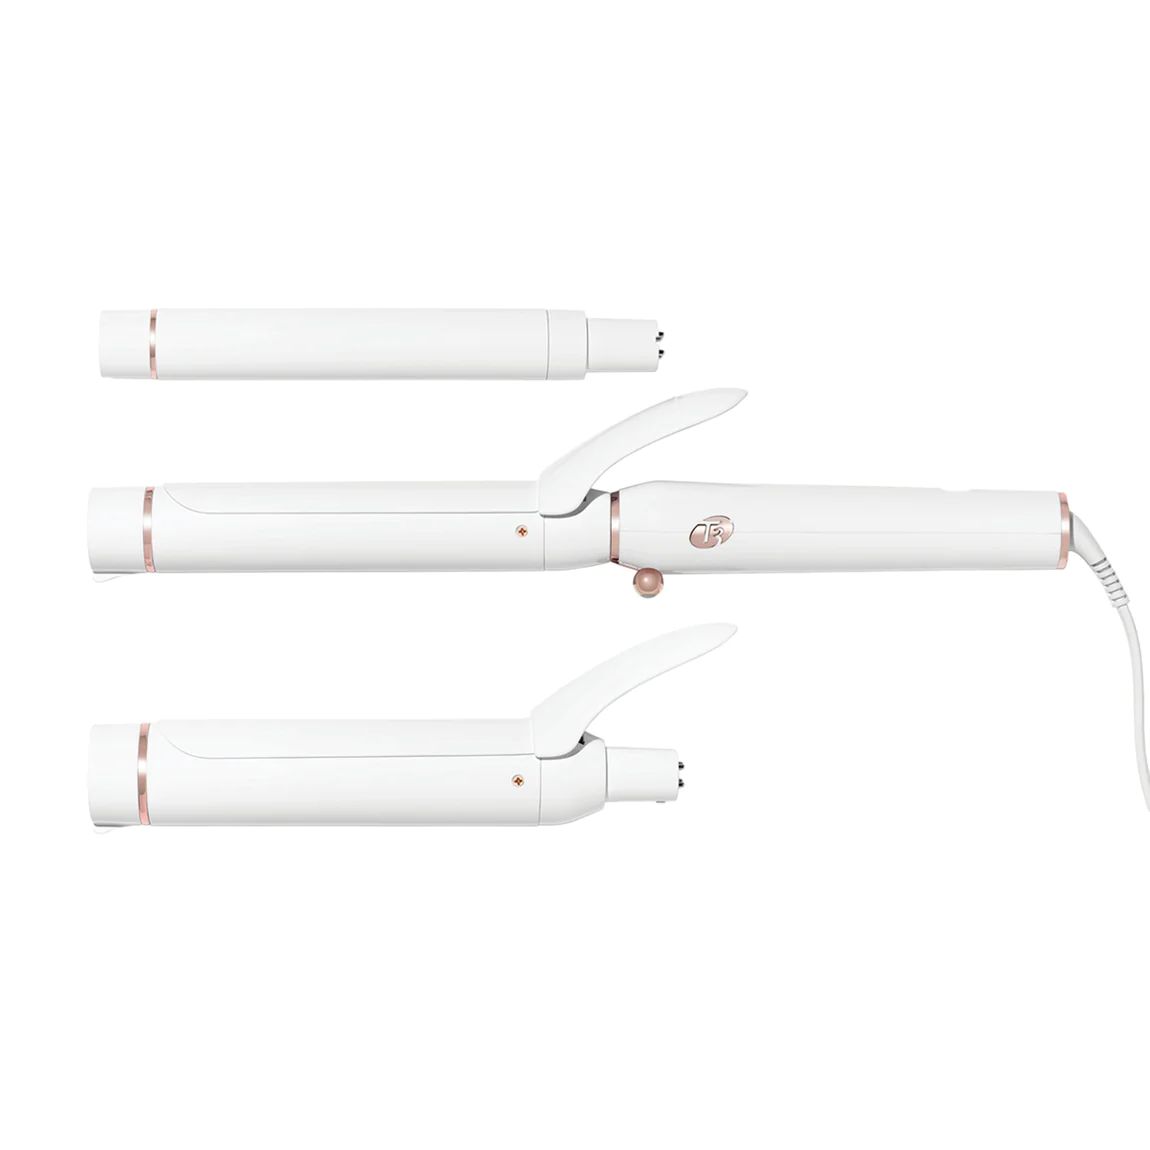 Switch Kit Wave Trio Styling Iron with Three Interchangeable Barrels | Bluemercury, Inc.